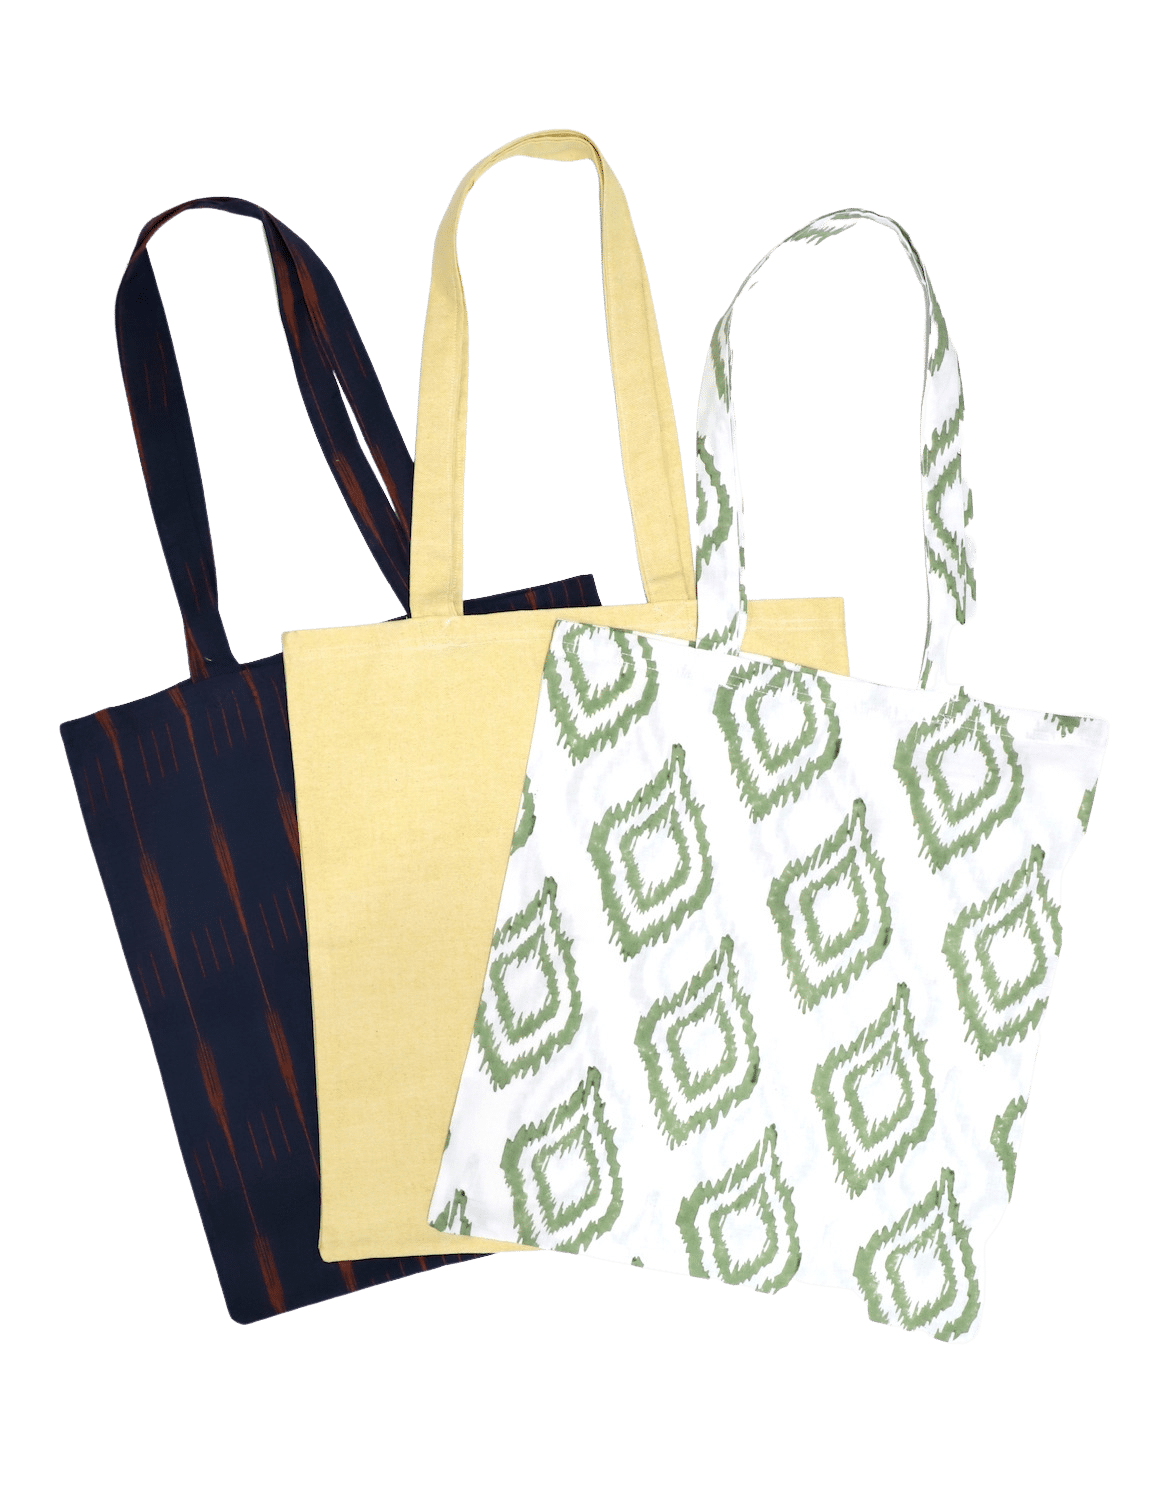 Reusable Tote Bag: Multiple Prints Available by Passion Lilie